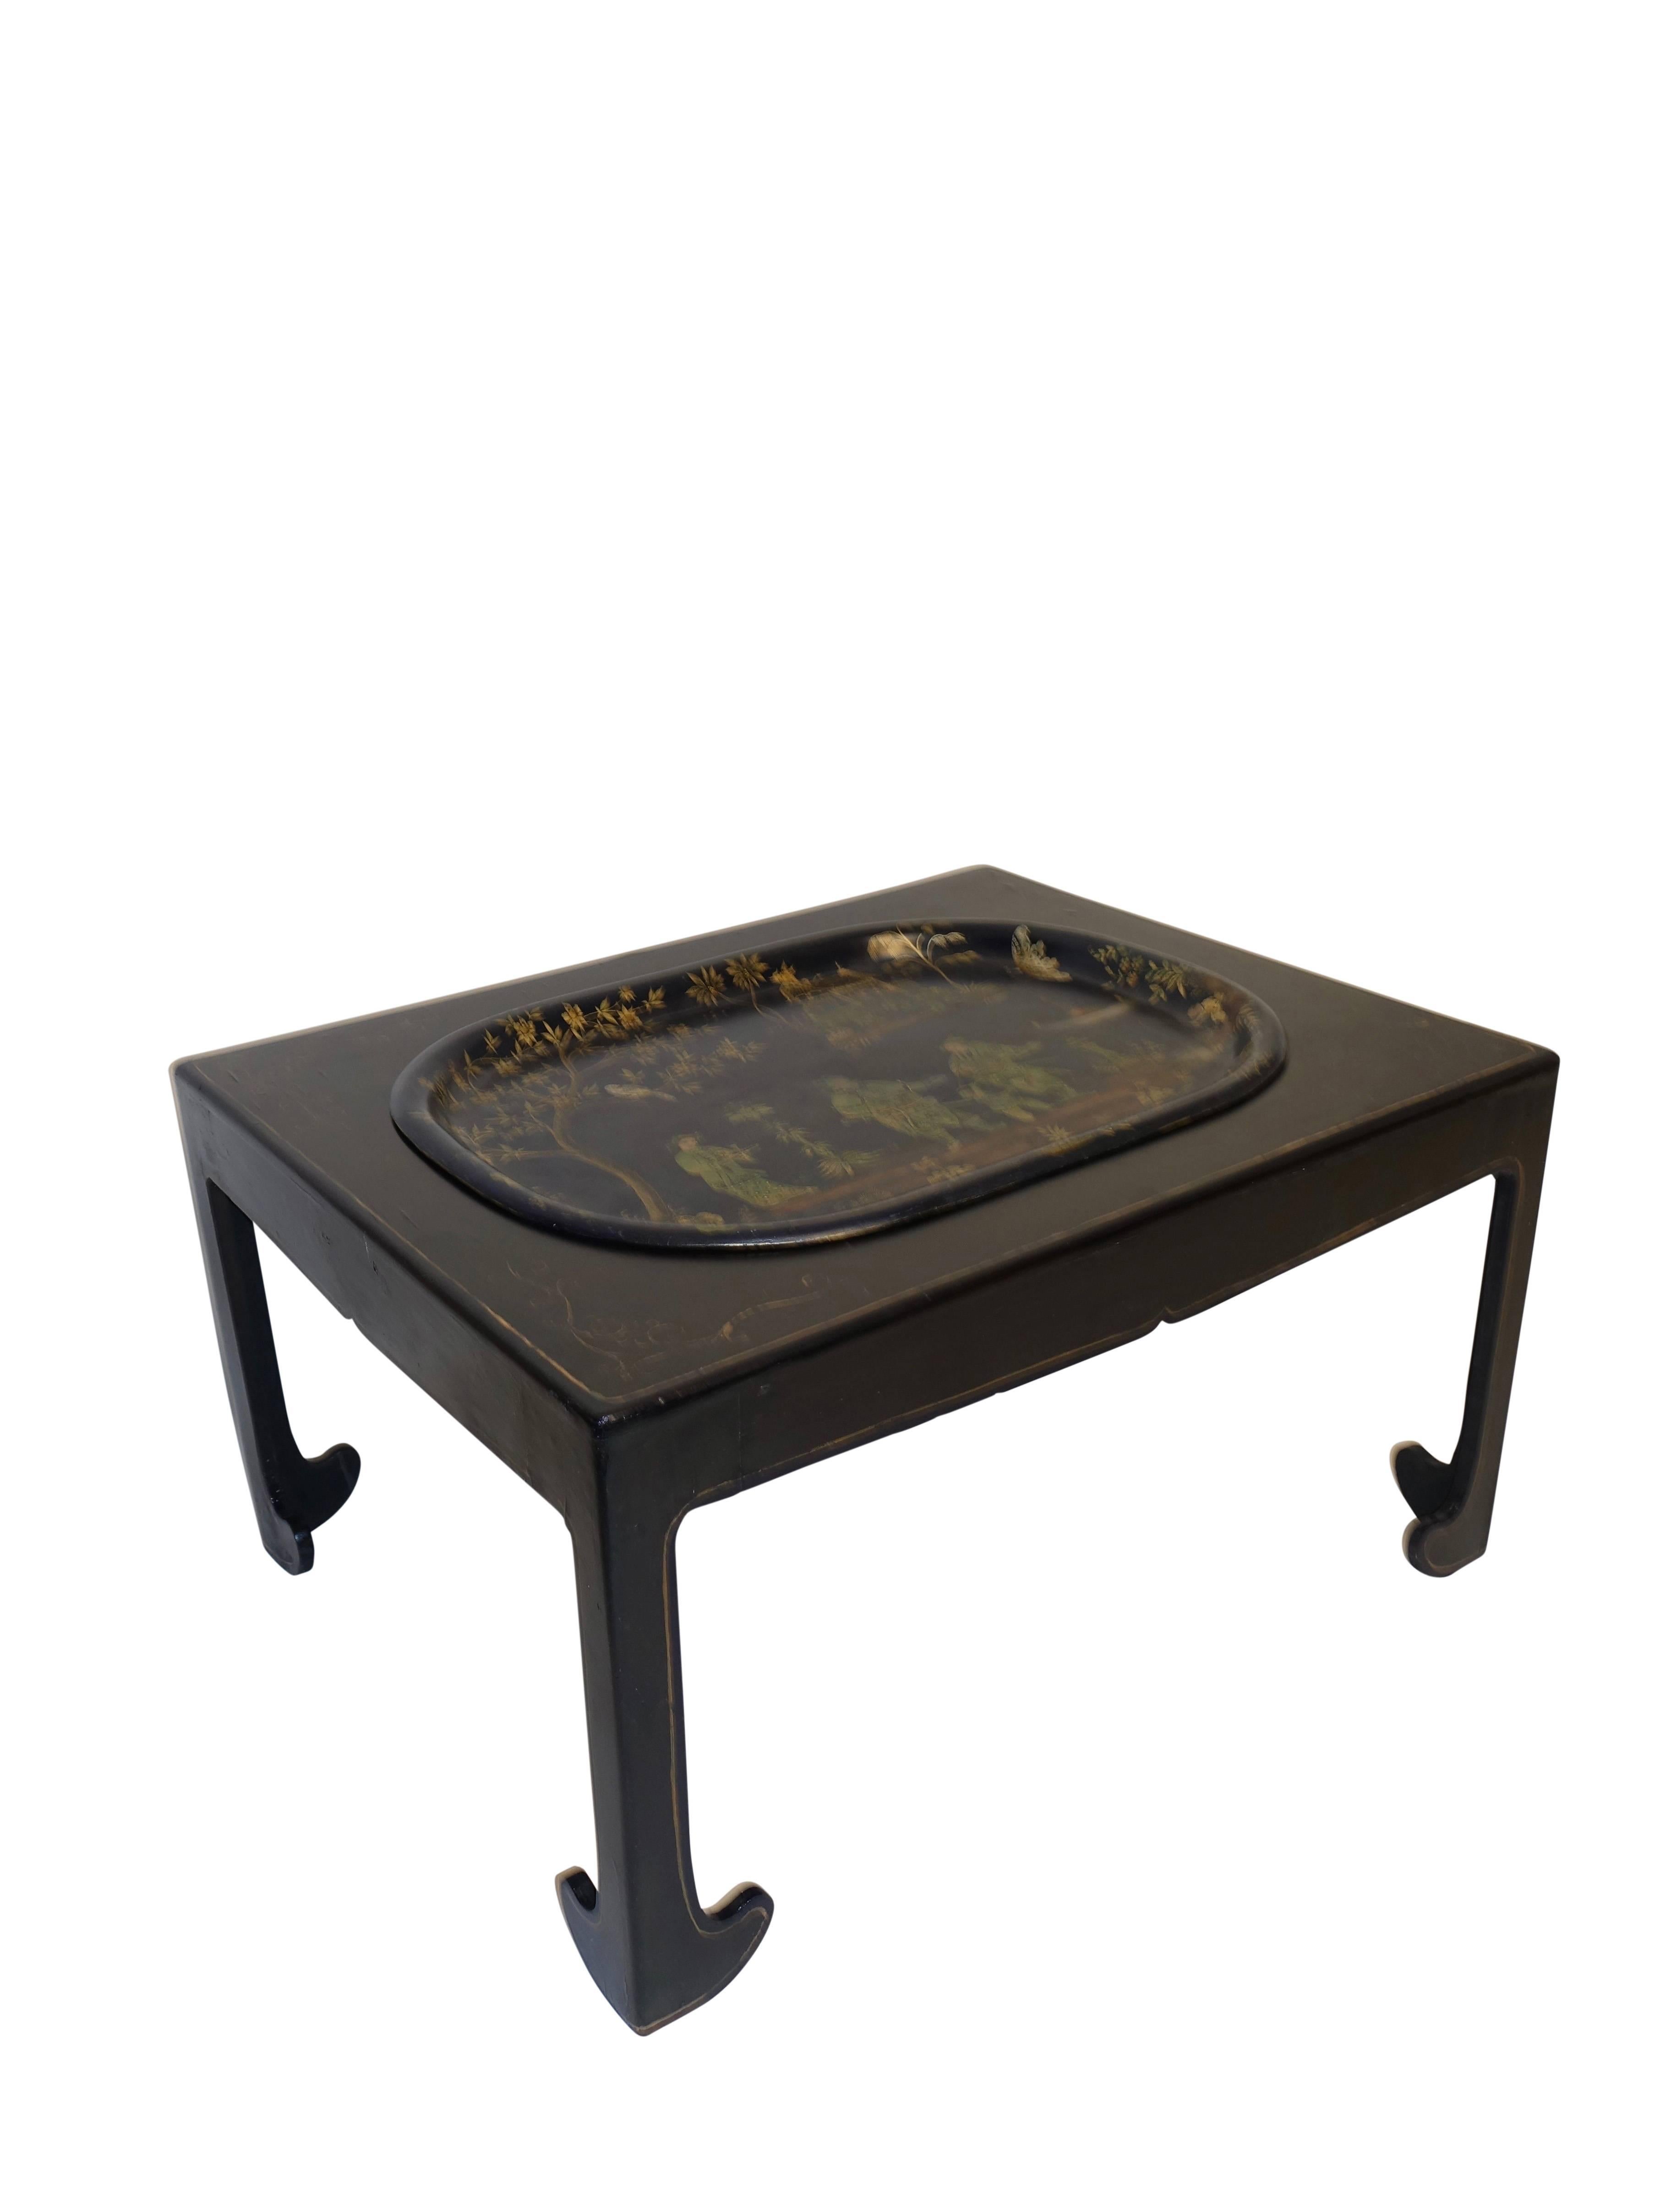 Lacquered Navy Blue Tole Tray Table with Black Asian Style Stand, England, 19th Century